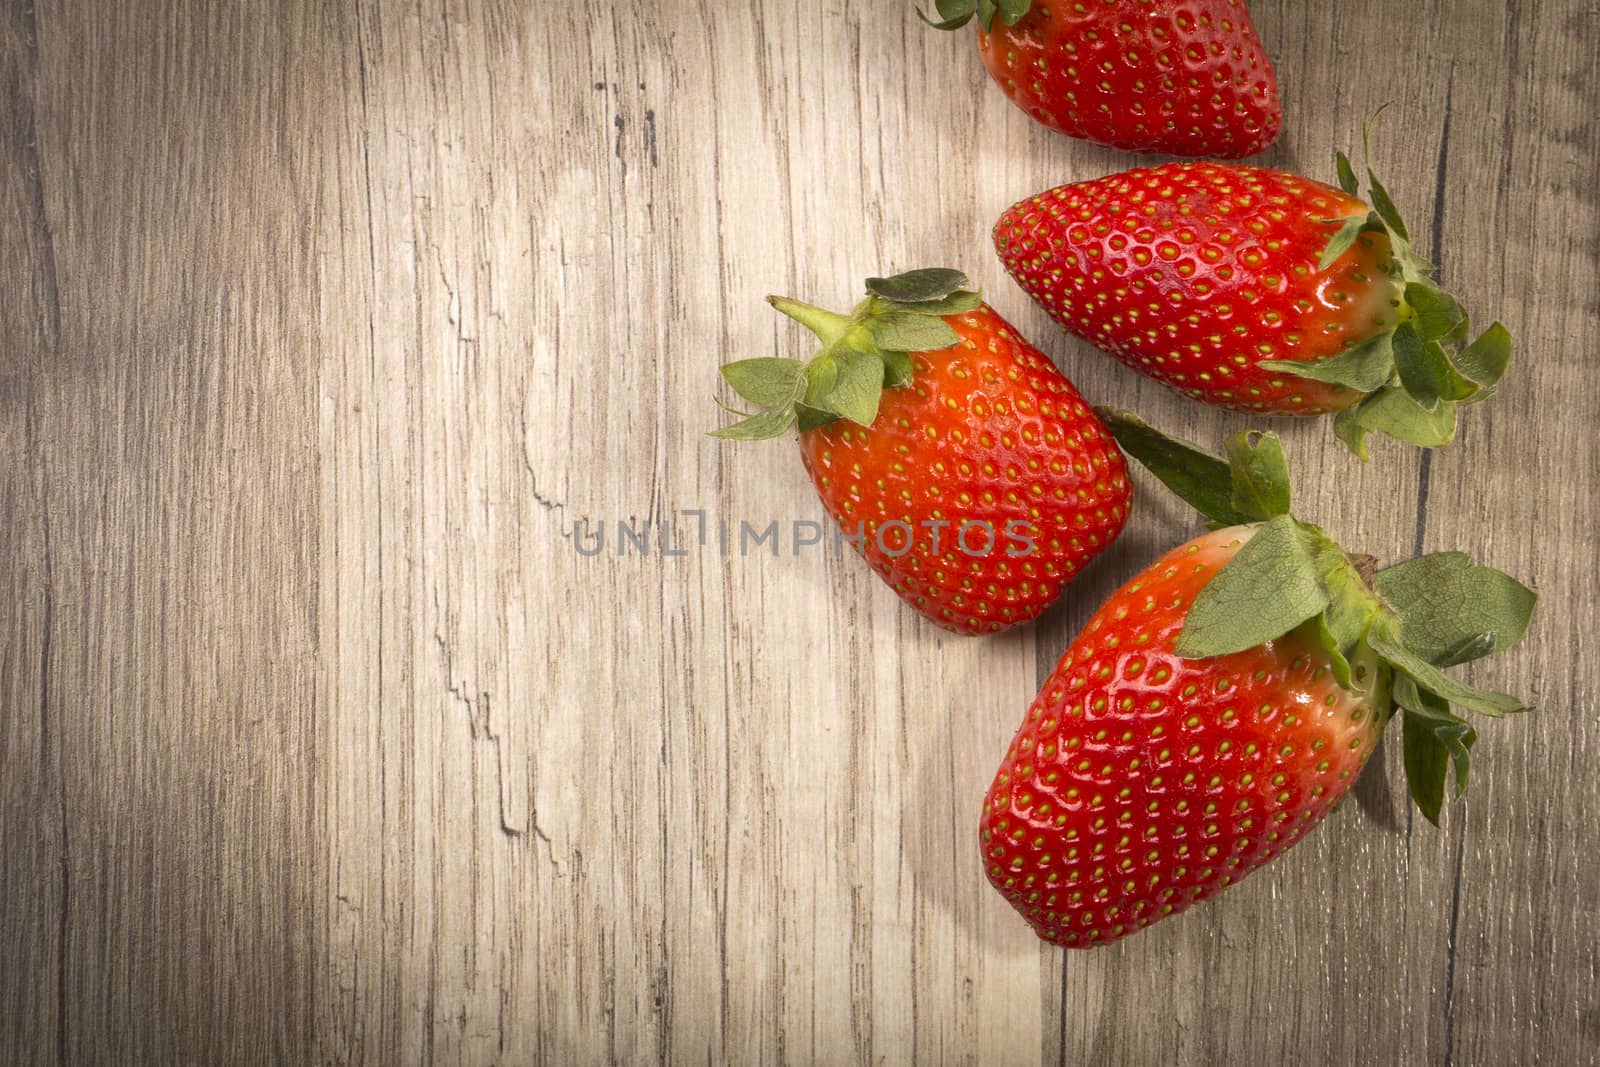 Strawberries on wooden background with copy space